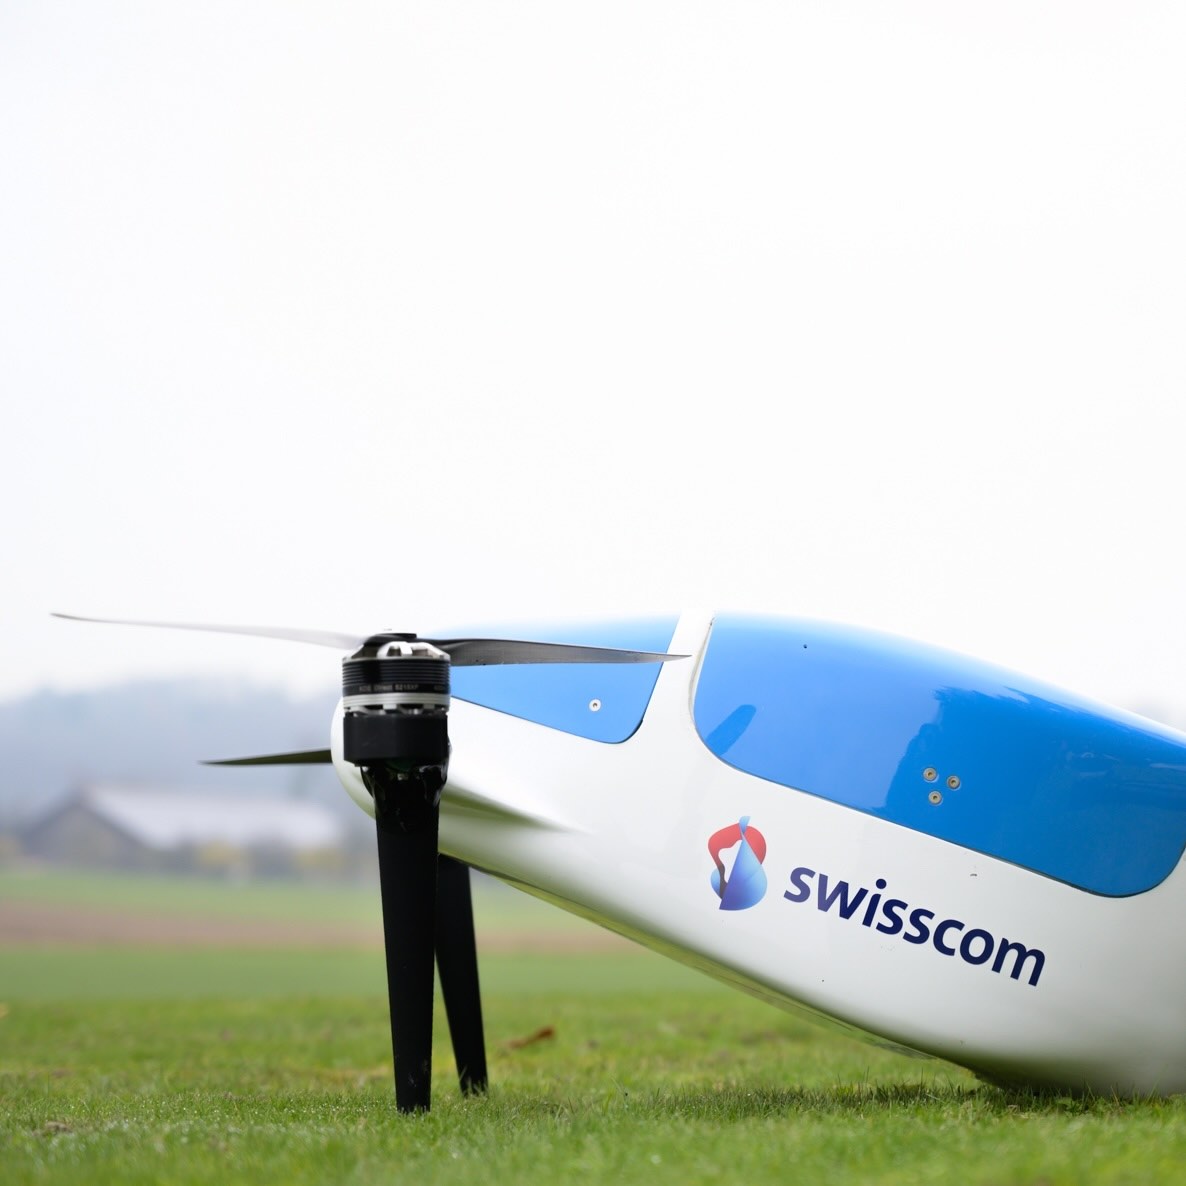 Taking Flight: How I Launched Swisscom’s Drone Business